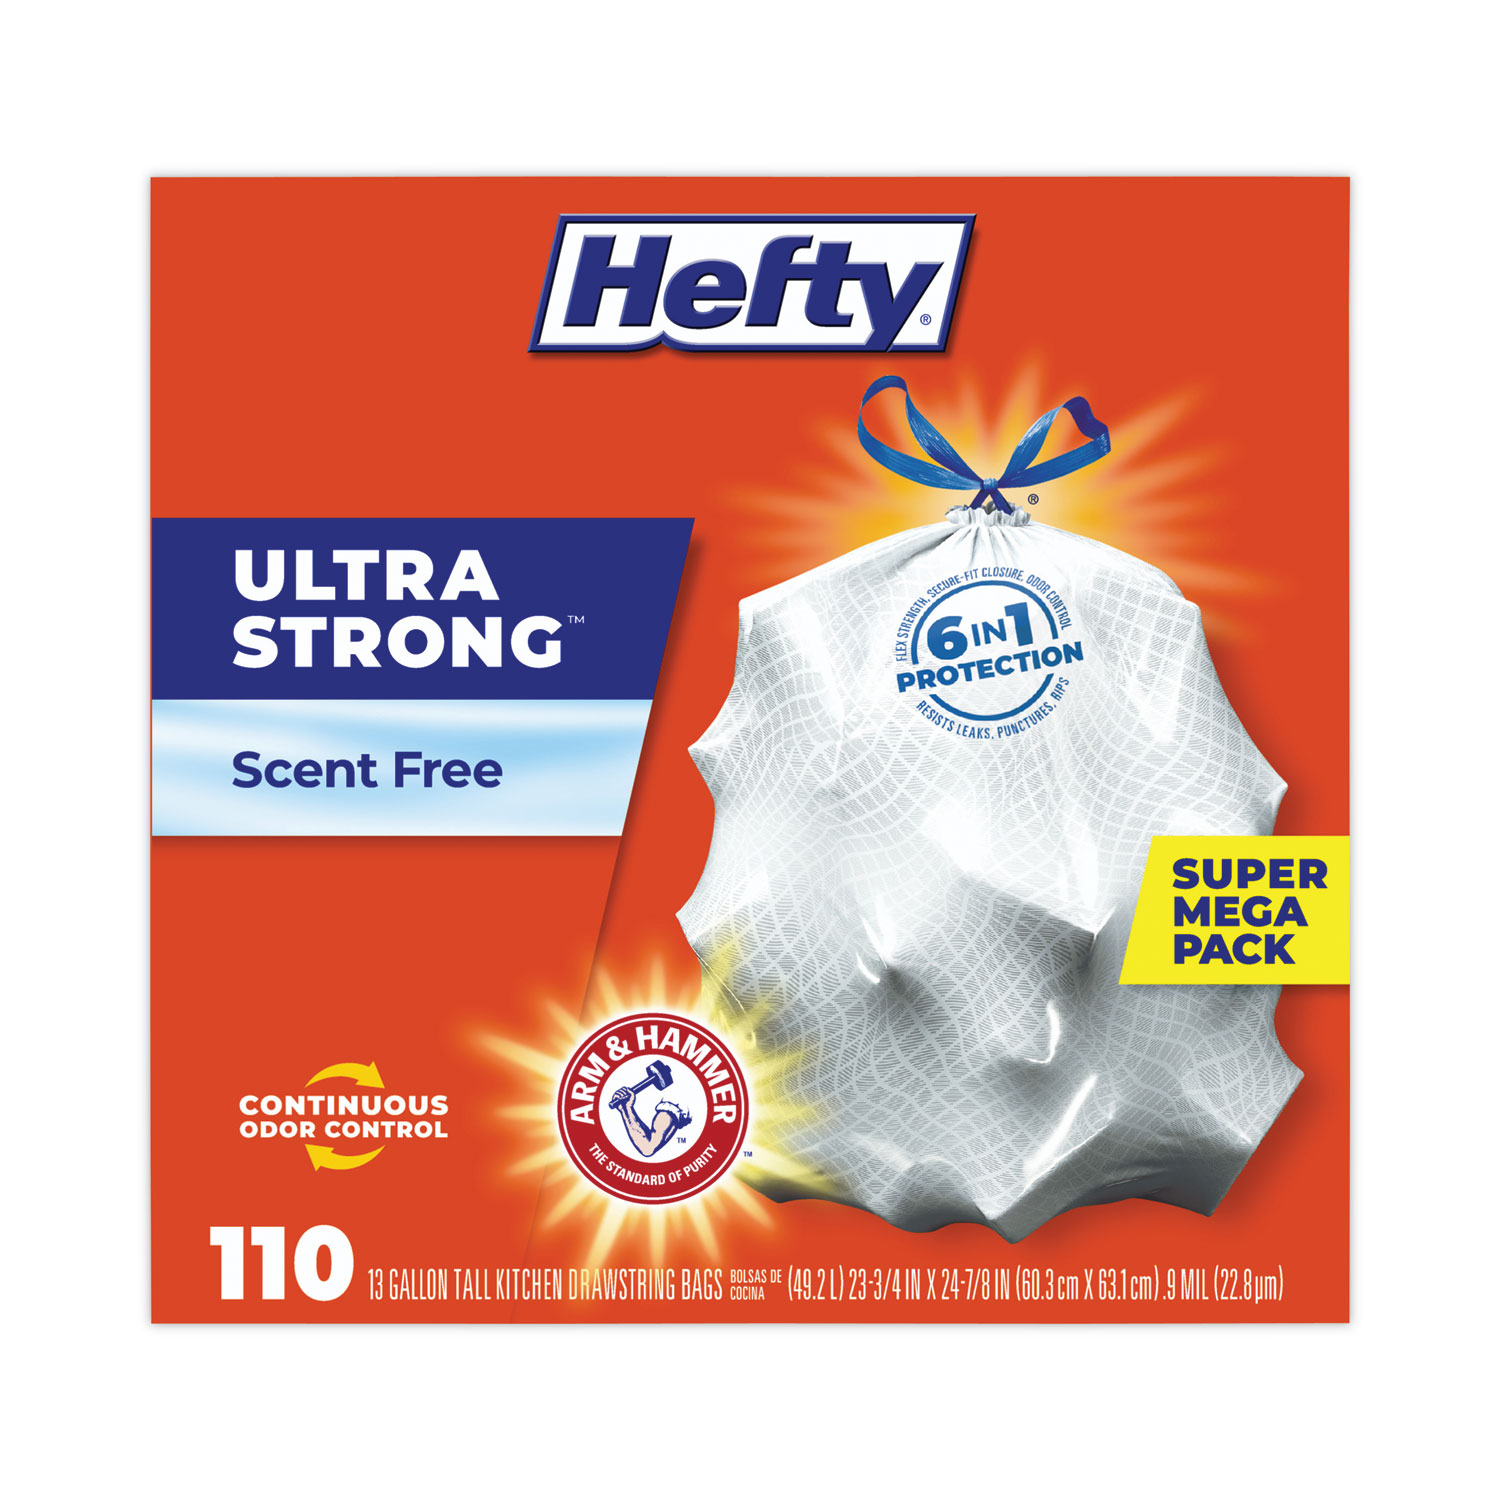 Ultra Strong 13 Gal. Citrus Twist Tall Kitchen Trash Bags (40-Count)